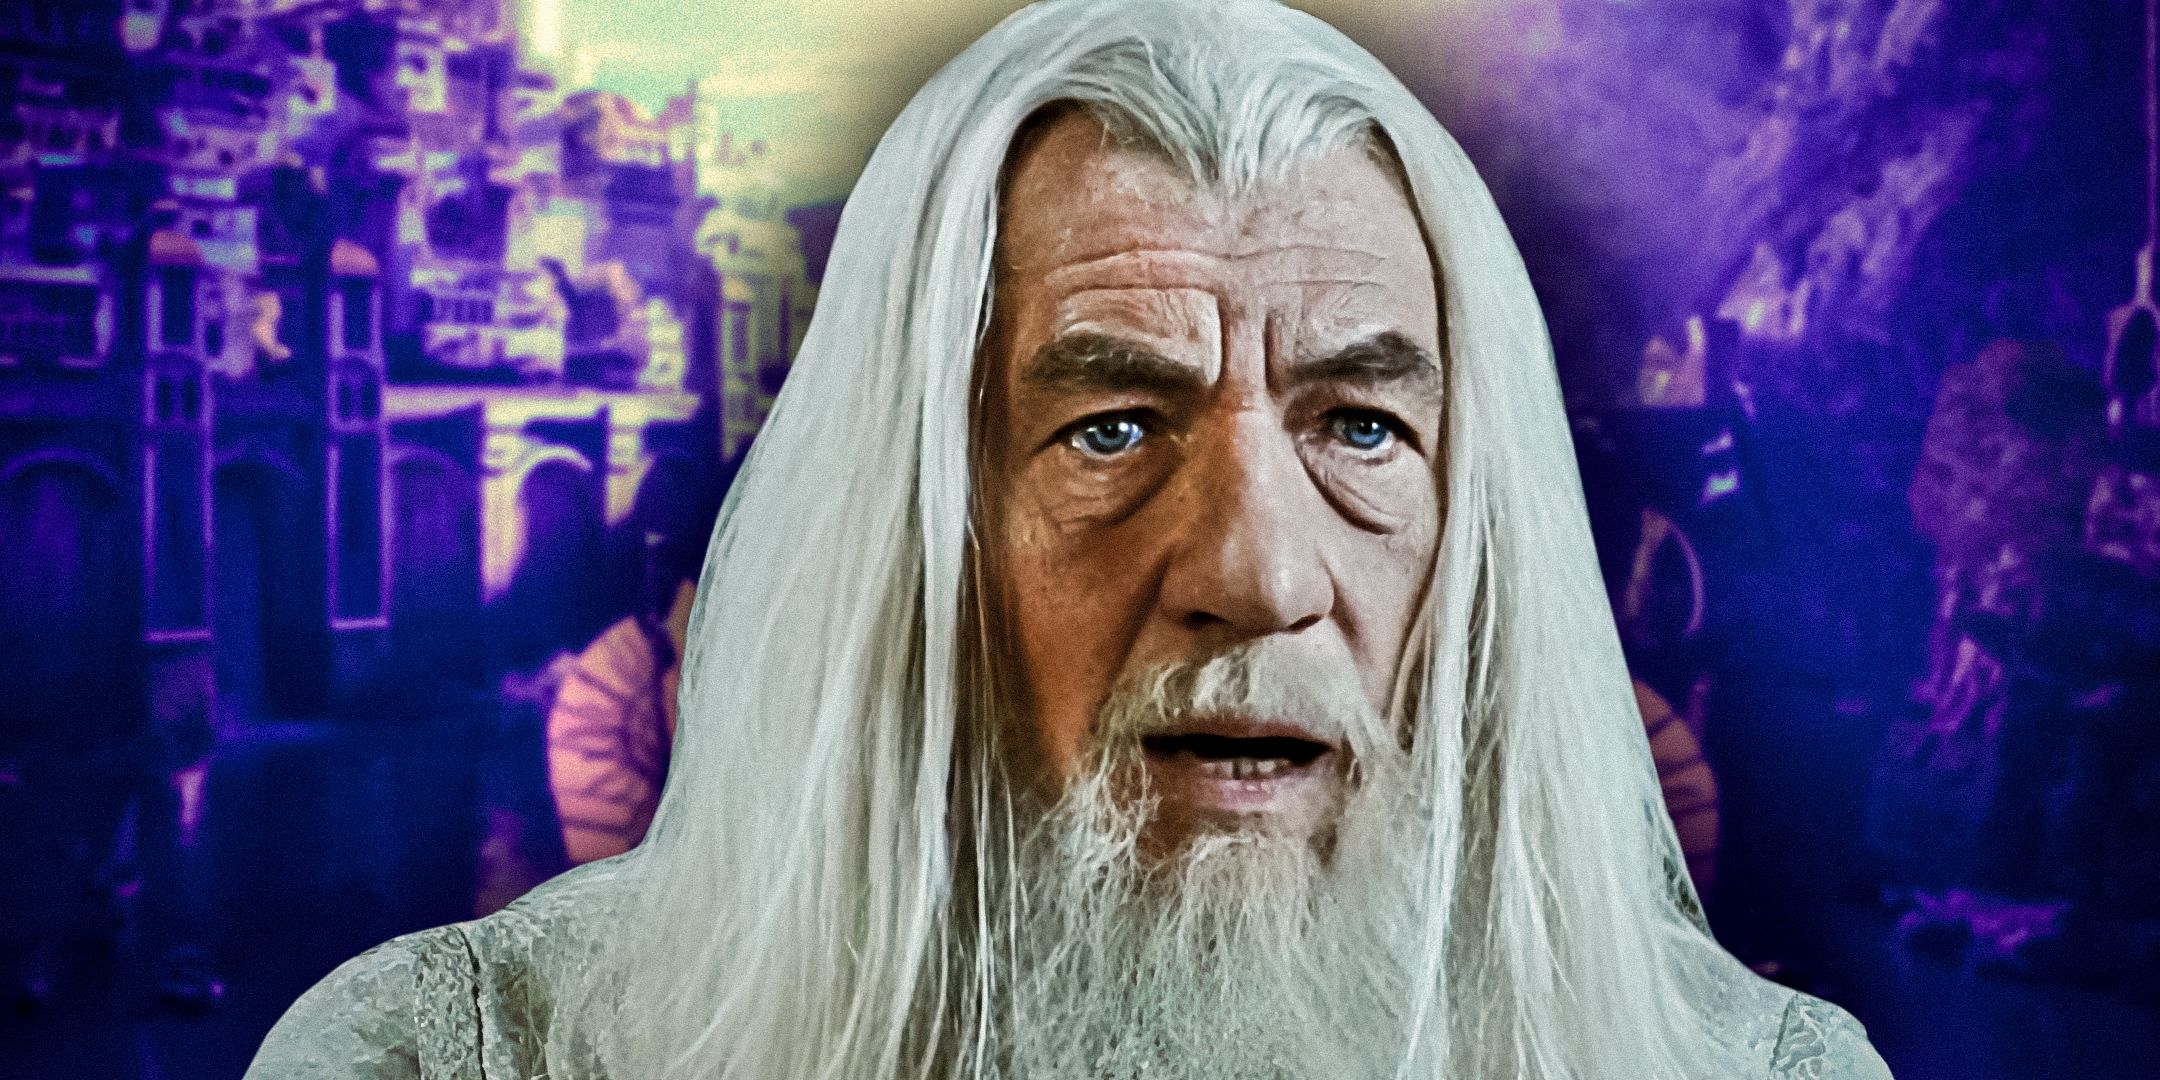 Ian McKellen as Gandalf the White in The Lord of the Rings movies